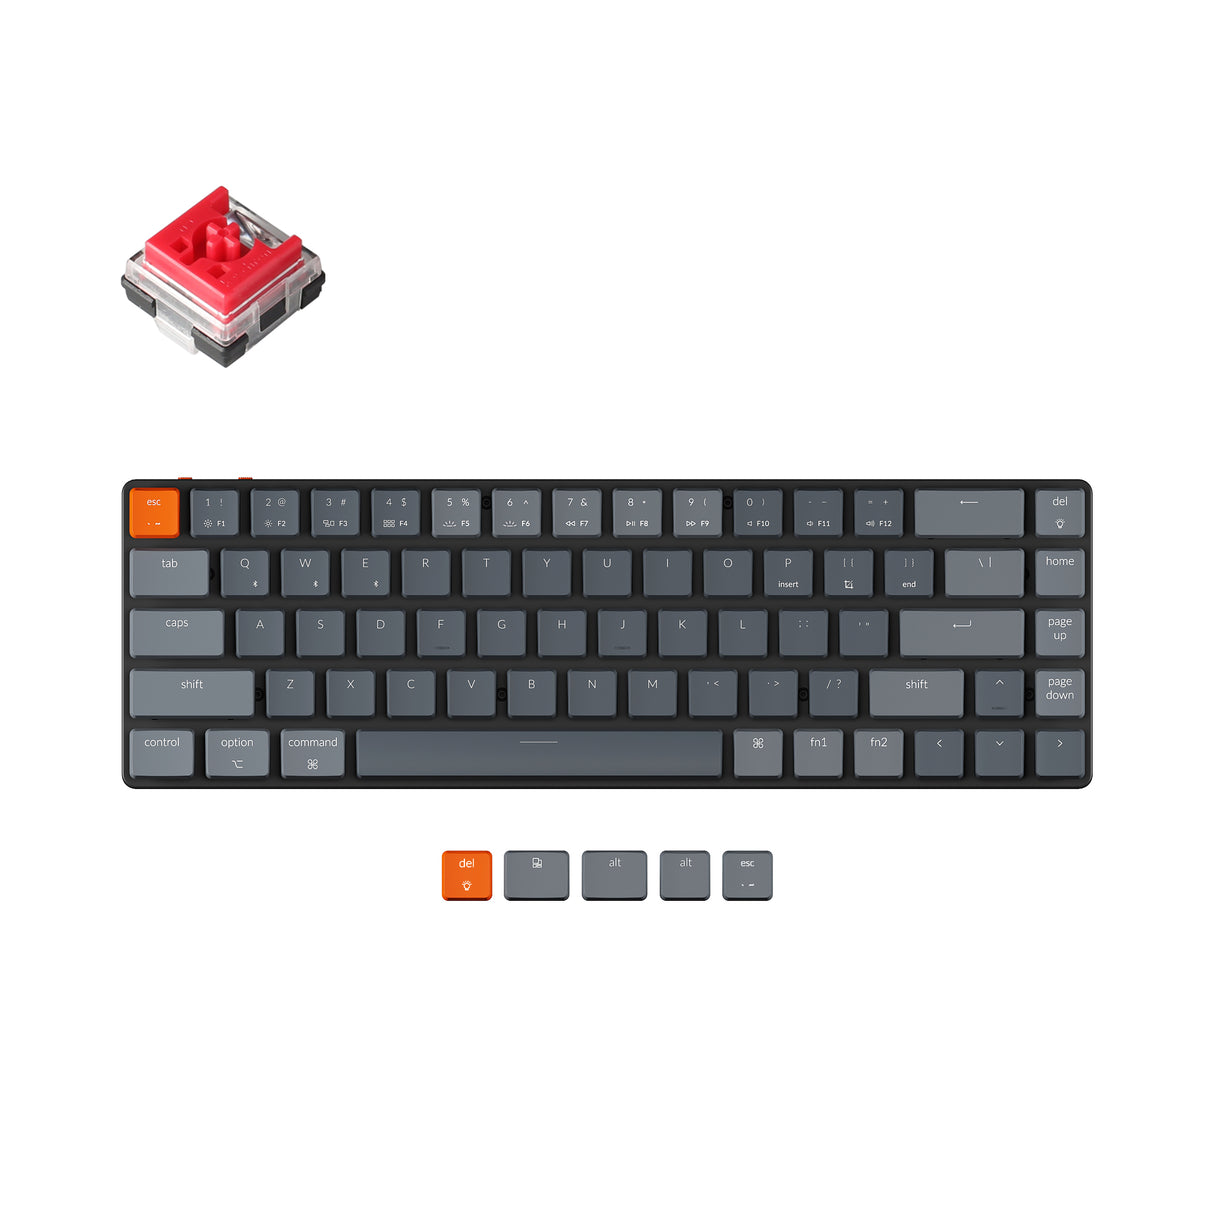 Keychron K7 65-percent ultra-slim compact wireless mechanical keyboard for Mac Windows Hot-swappable low-profile Keychron Optical red switches with RGB backlit